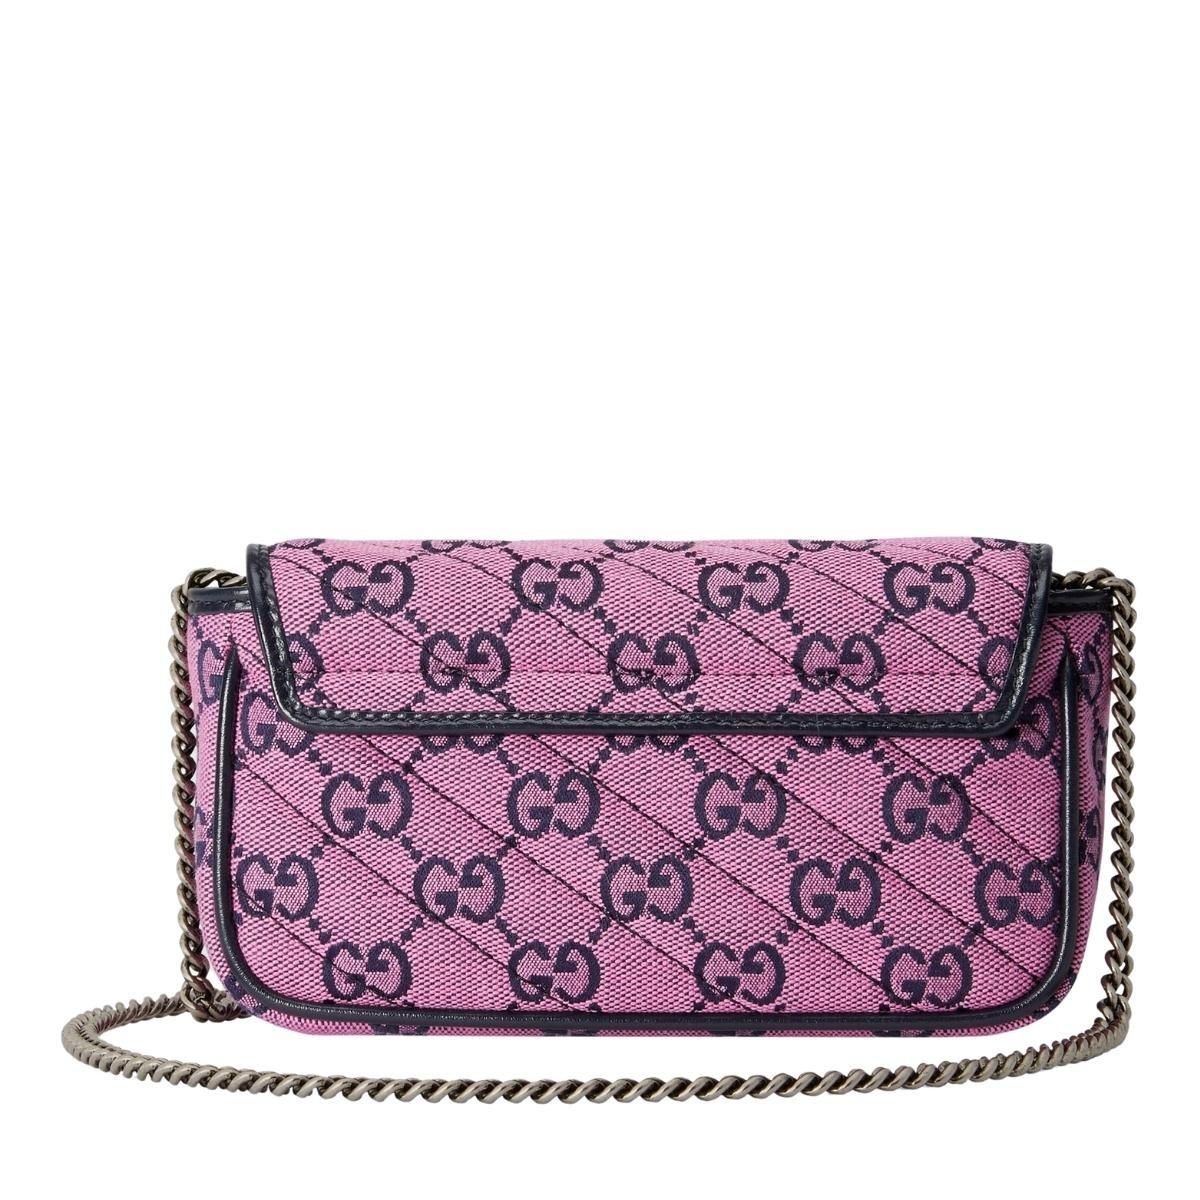 Follow us on insta @runwaycatalog
This GG Marmont super mini bag is part of the GG Multicolour collection
Pink diagonal matelassé GG canvas with floral appliqué
Black leather trim
Silver-toned hardware
Attached key ring that can attach to a separate